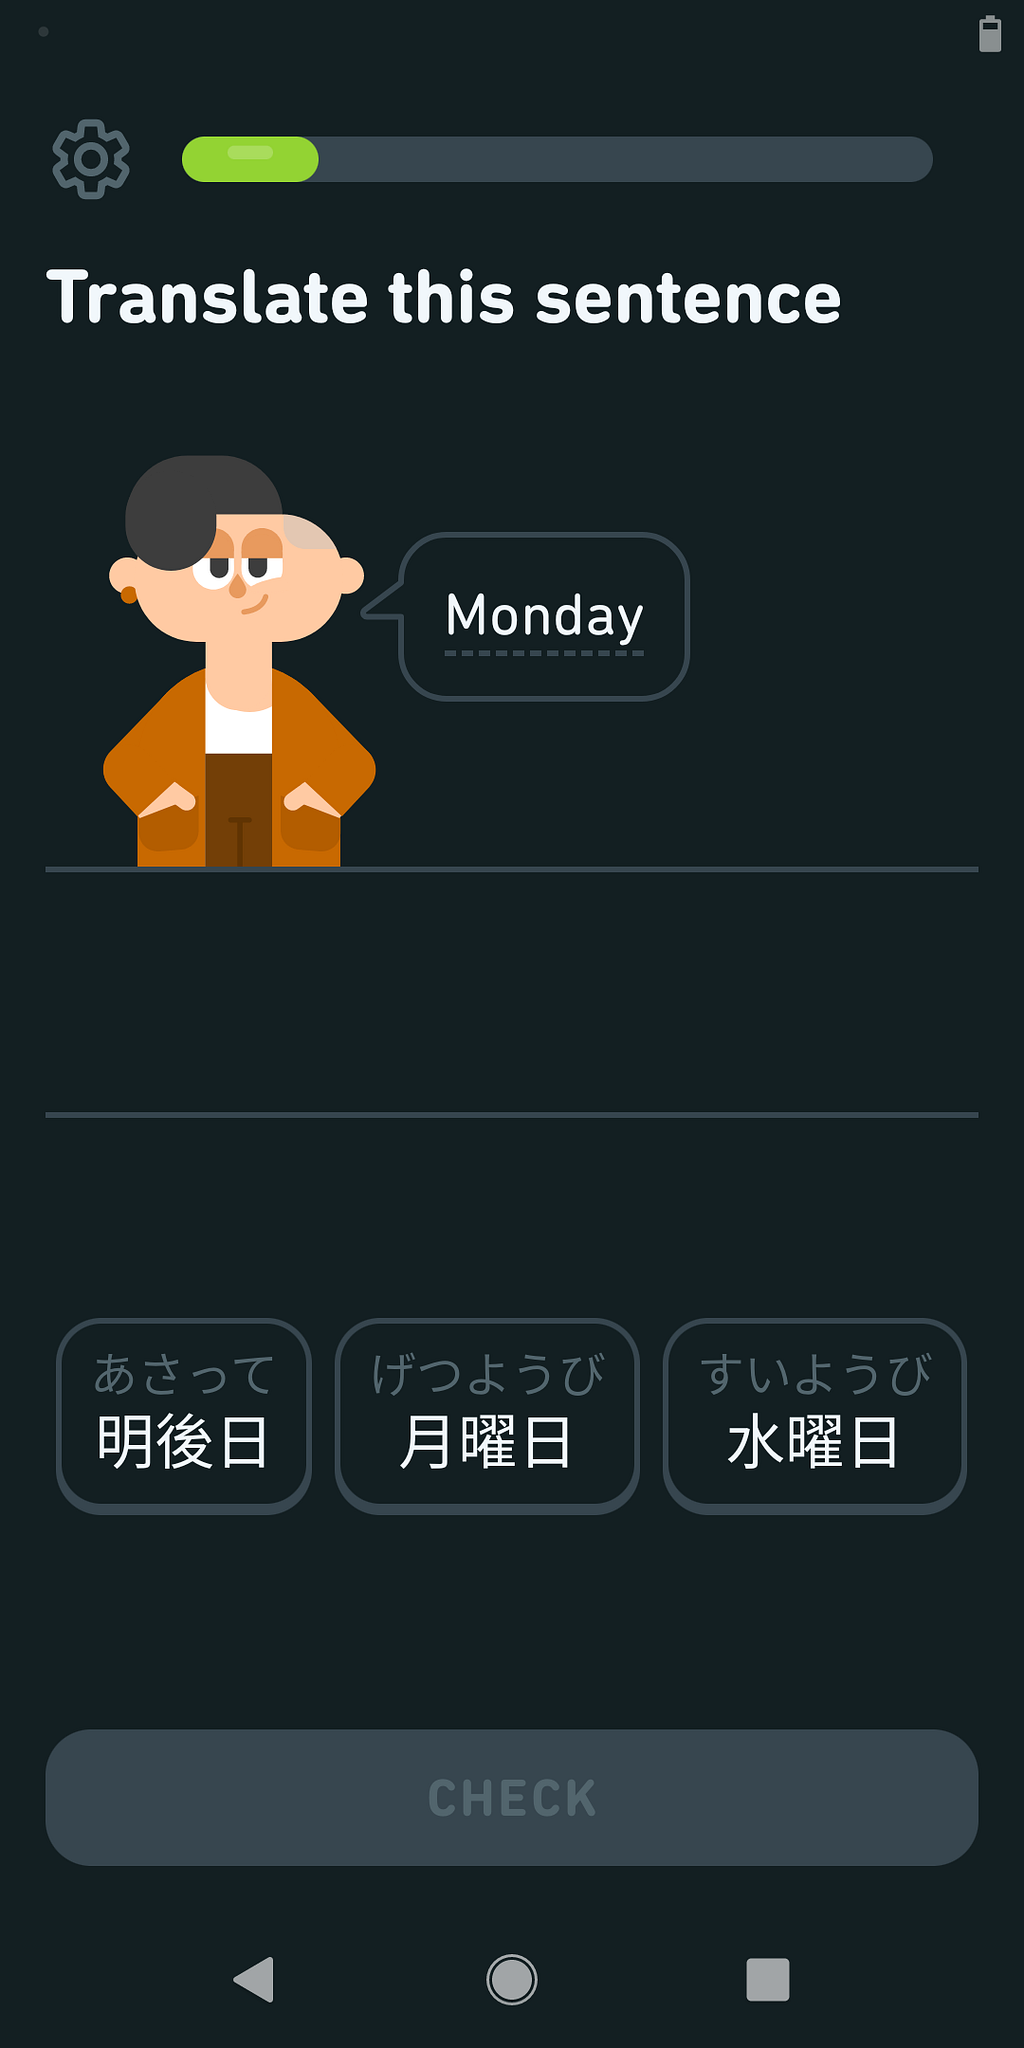 Screenshot or an exercise in Duolingo: “Translate this sentence: Monday” with Japanese sentences to choose from